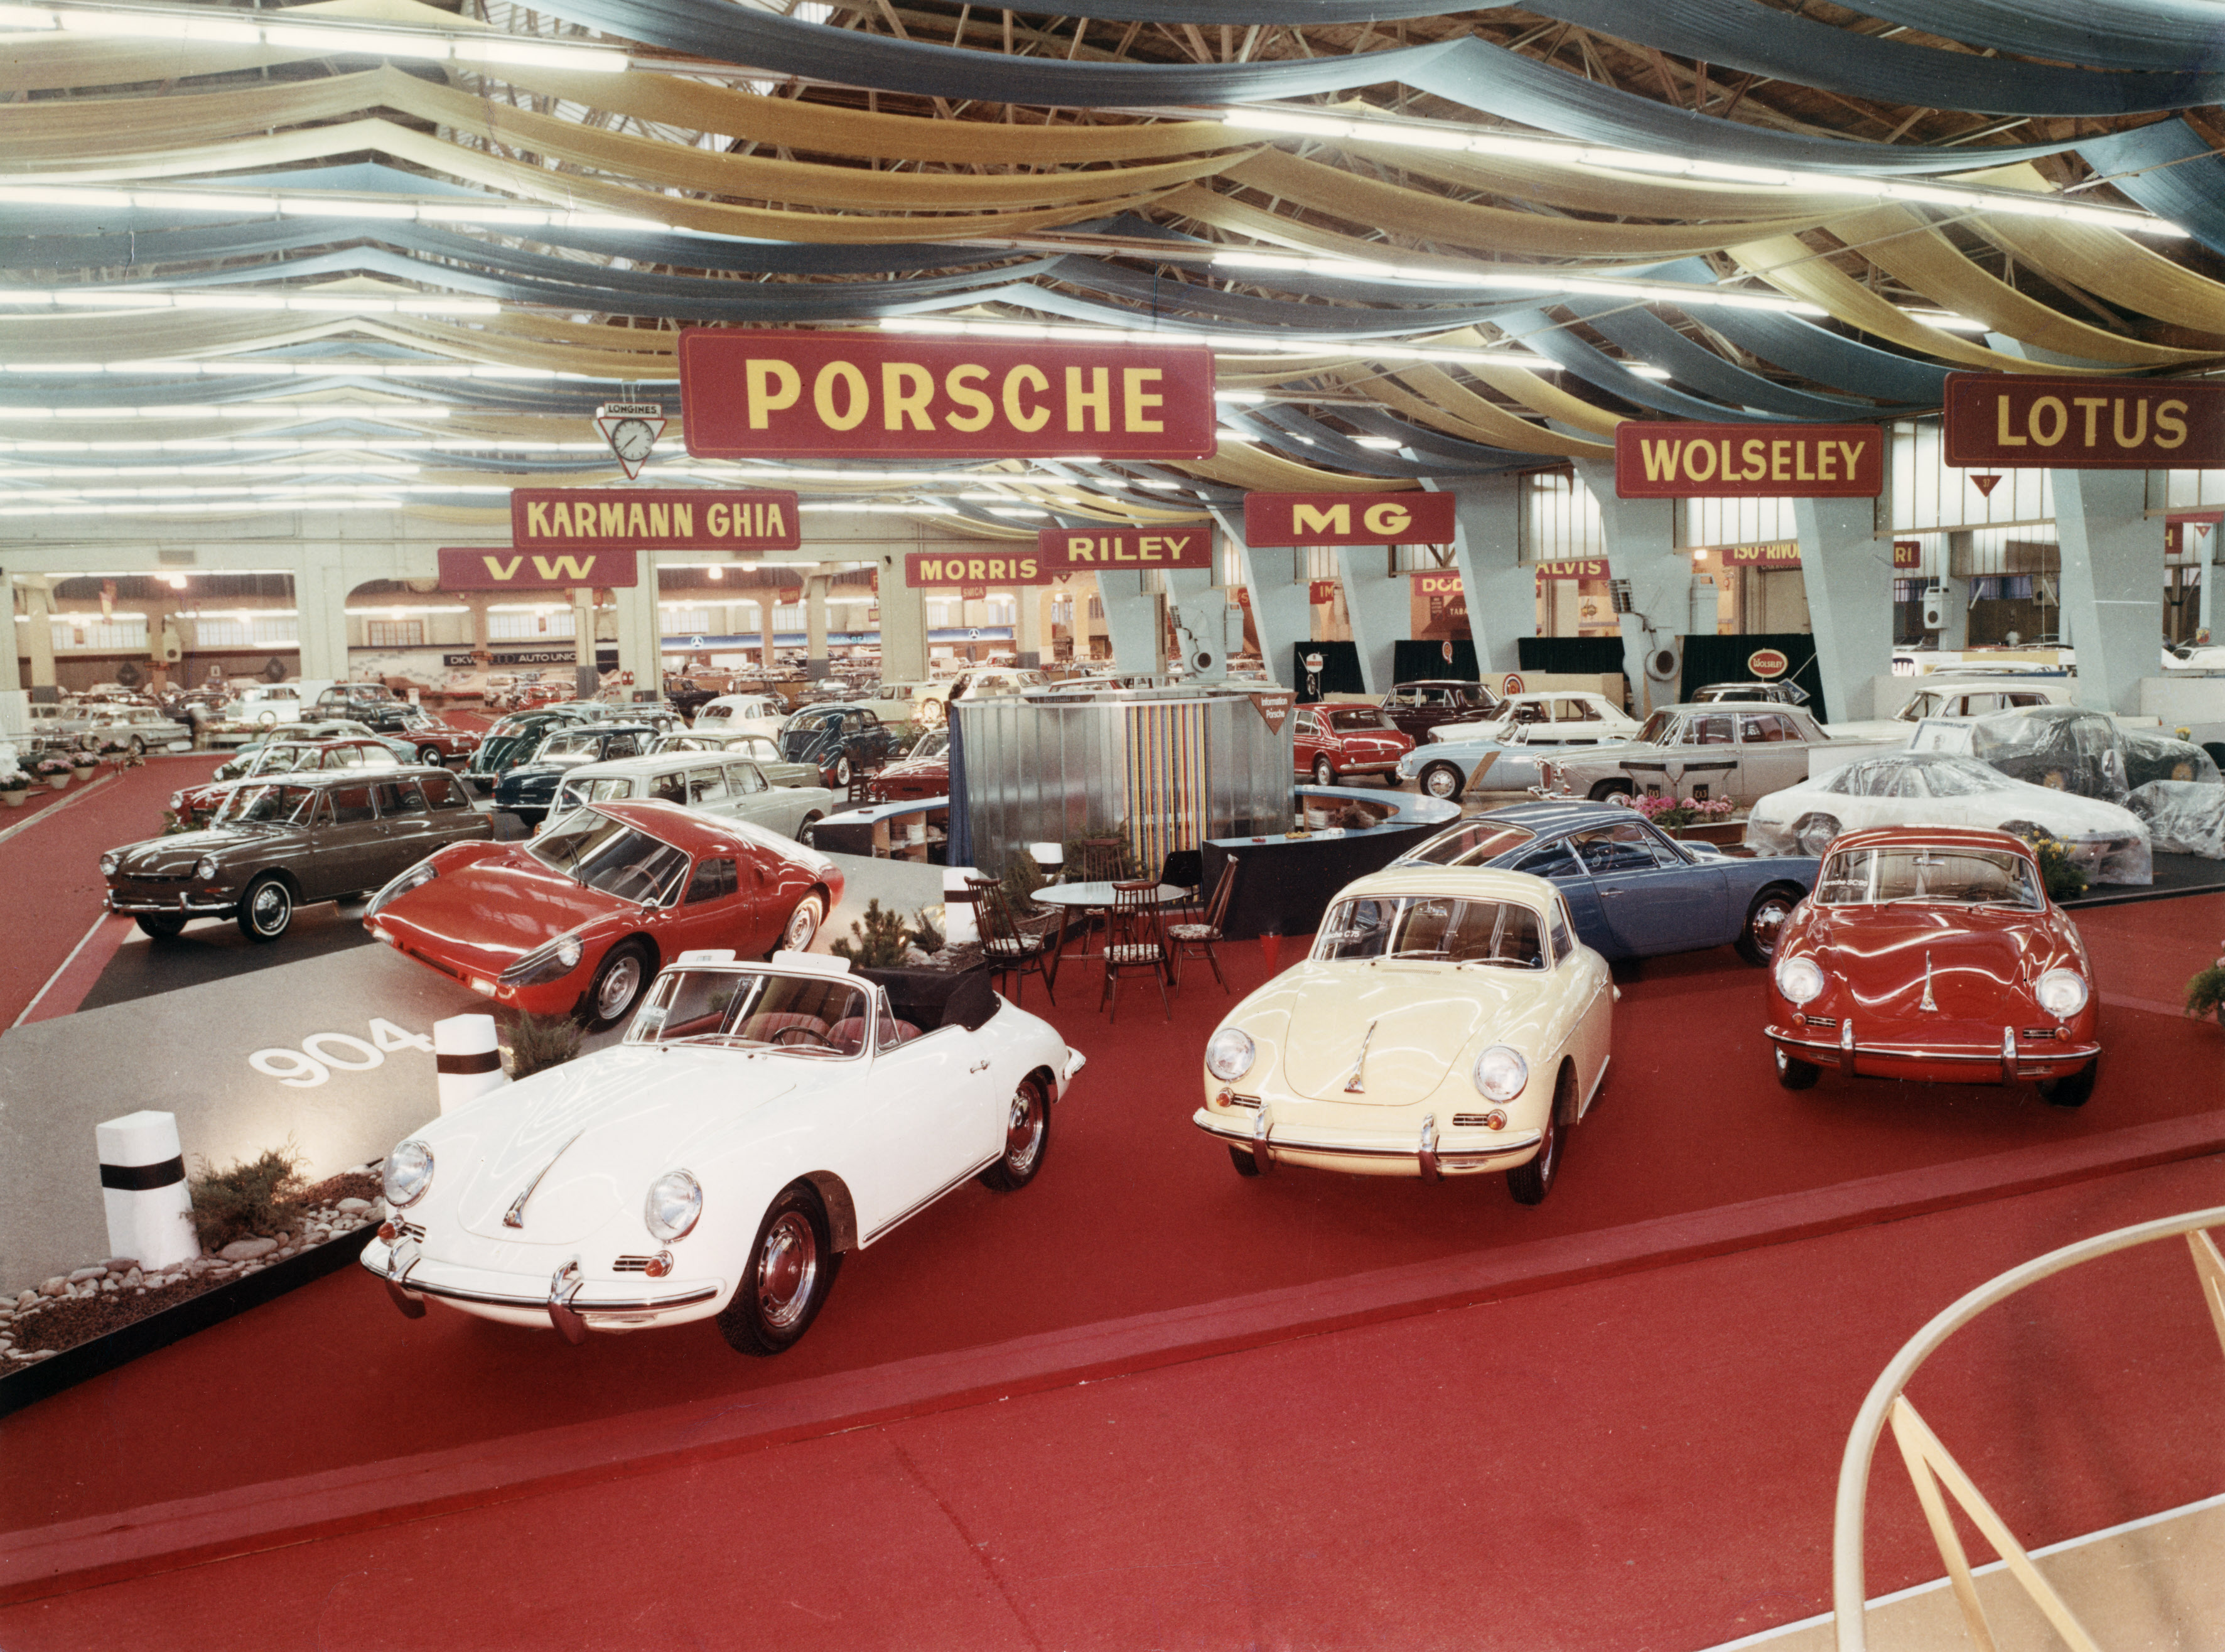 Six months after the Frankfurt debut, Porsche showed a Quick Blue–painted 911 prototype, chassis 13 326, along with a bright red 904 at the Geneva, Switzerland, auto show. Porsche shared show space with Volkswagen. Porsche Archiv